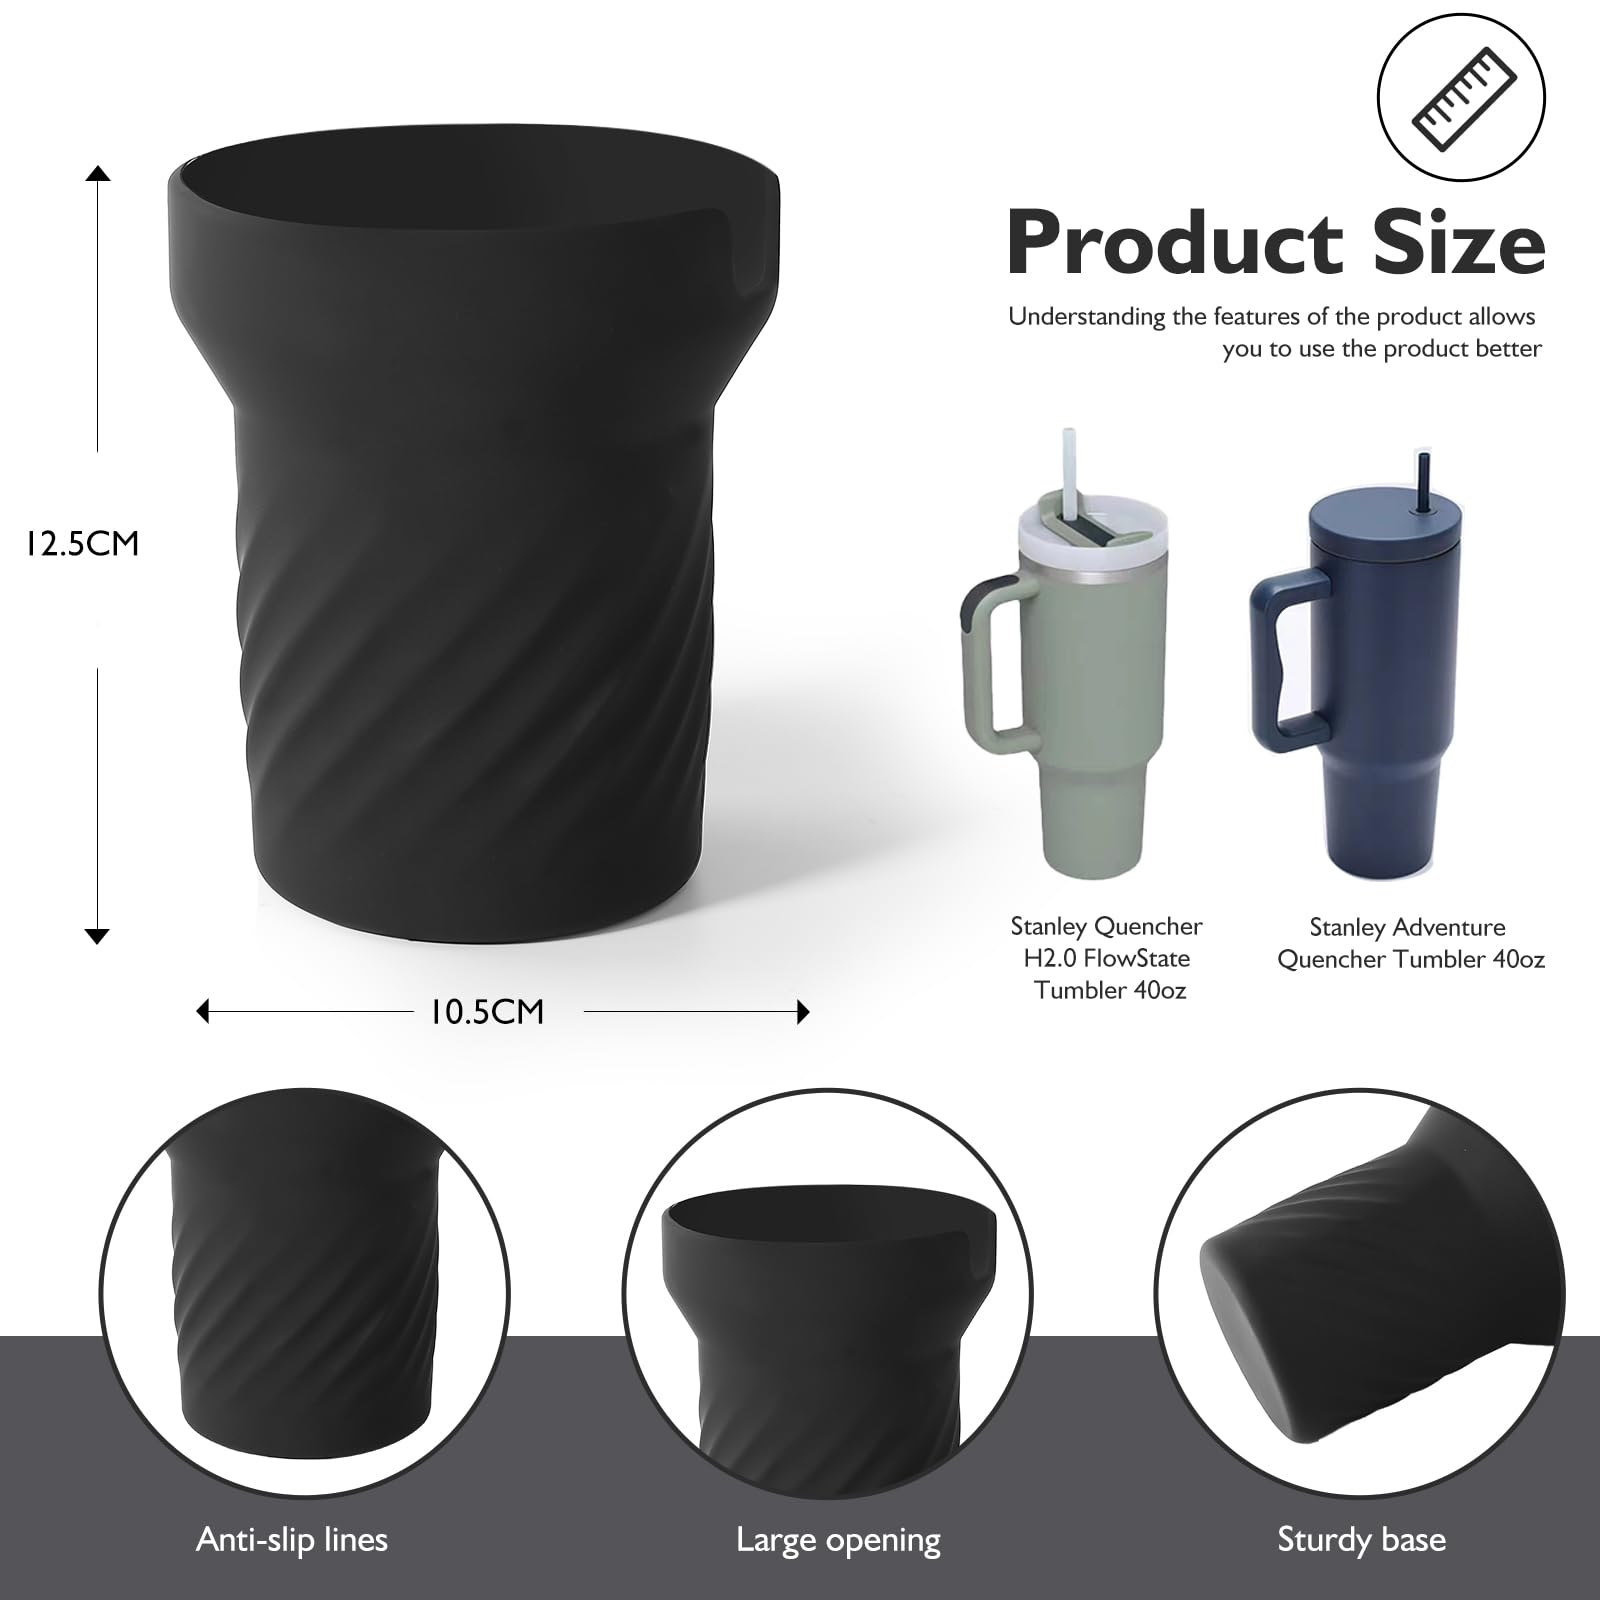 XMBYGY Spill Proof Stopper Set and Silicone Boot Cover for Stanley Quencher H2.0 FlowState Tumbler 40oz, Include 1 Cup Boot Sleeve, 1 Straw Cover Cap,1 Square Spill Stopper,1 Round Leak Stopper